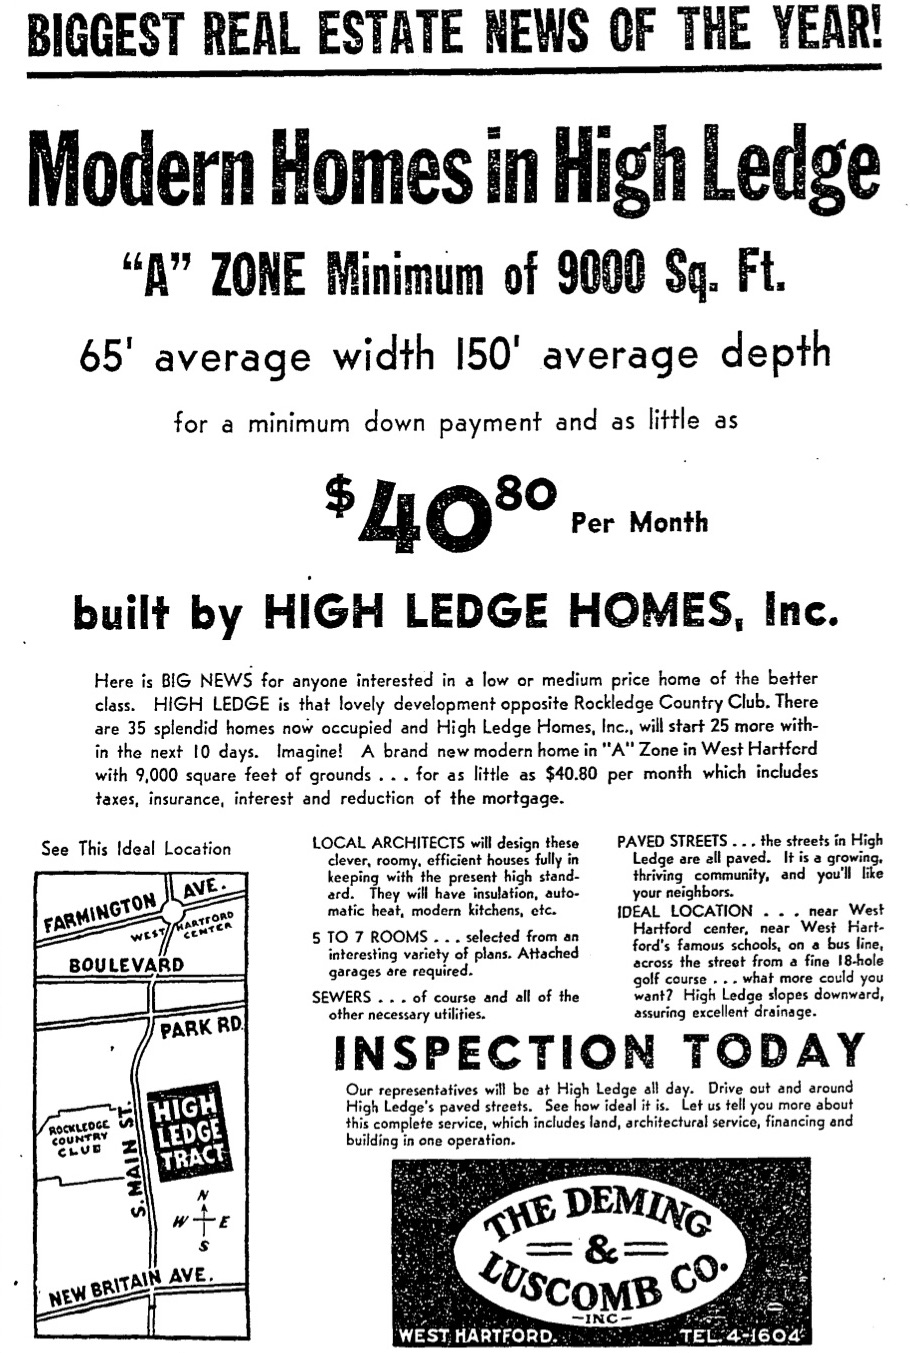 Although High Ledge Homes did not openly publicize their Whites-only property covenant, their 1940 advertising promised homebuyers that “you’ll like your neighbors.” Copyrighted by the Hartford Courant, reprinted under fair-use copyright guidelines.